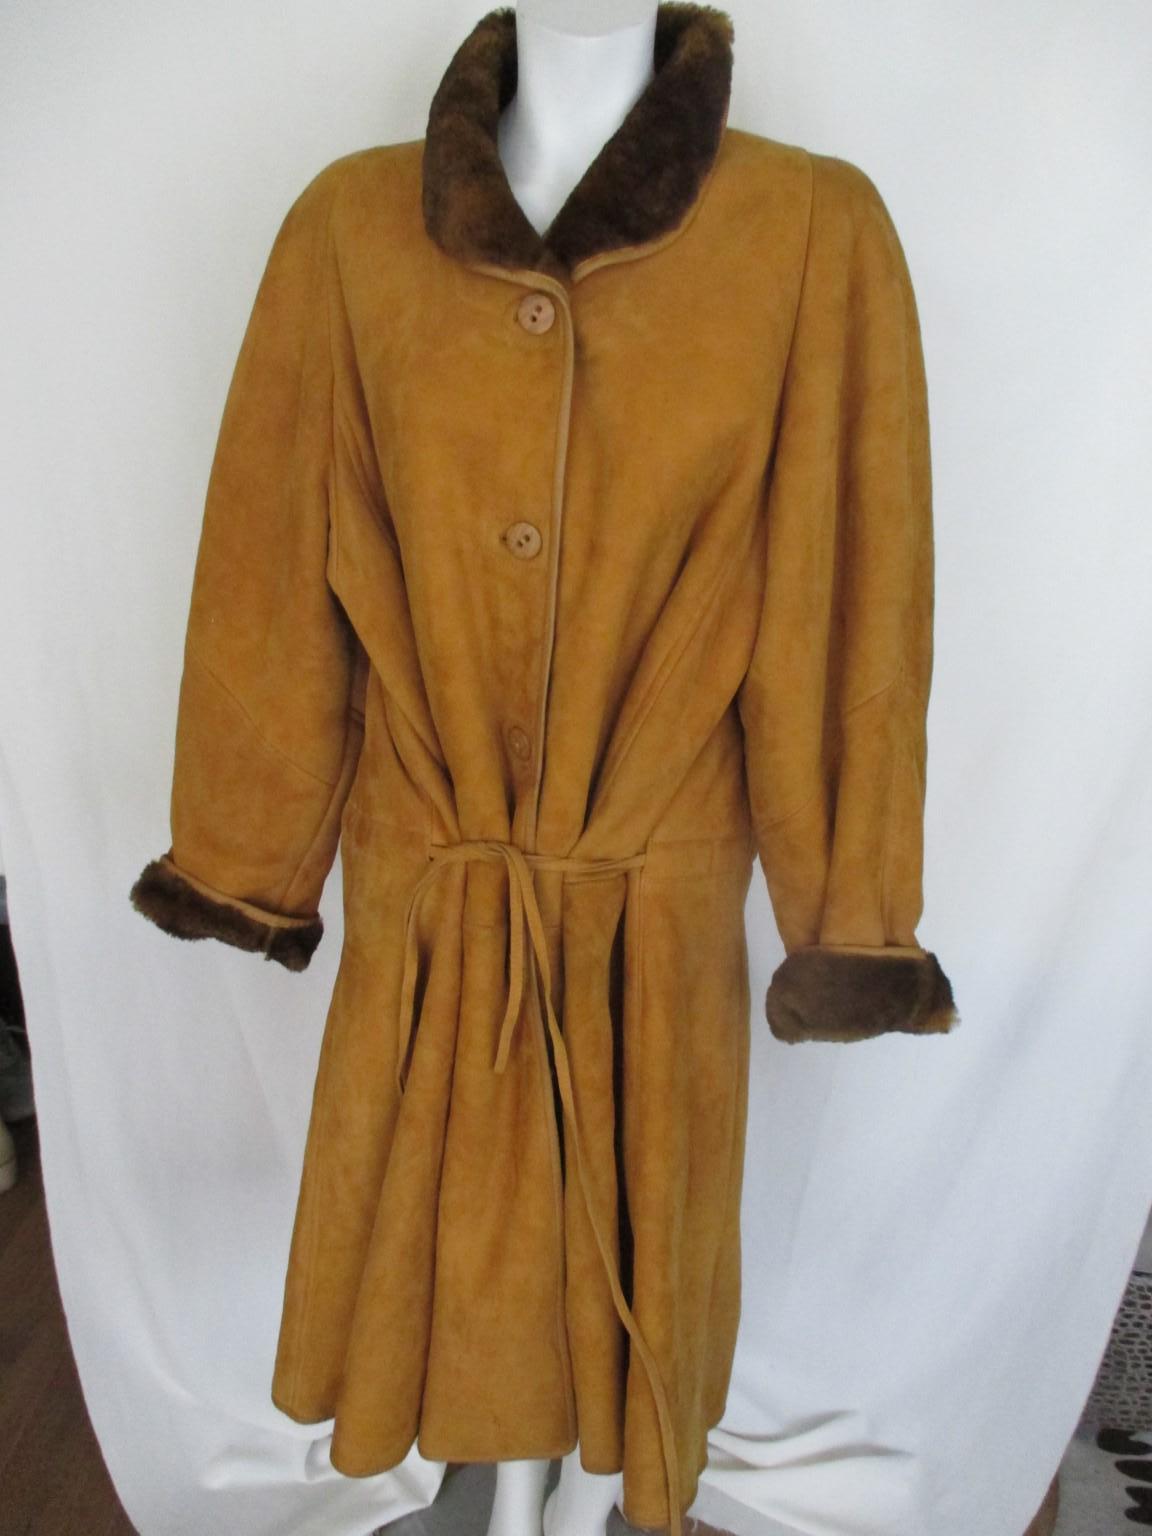  Mustard Yellow Tone Soft Lamb Shearling Flaired Coat In Good Condition For Sale In Amsterdam, NL